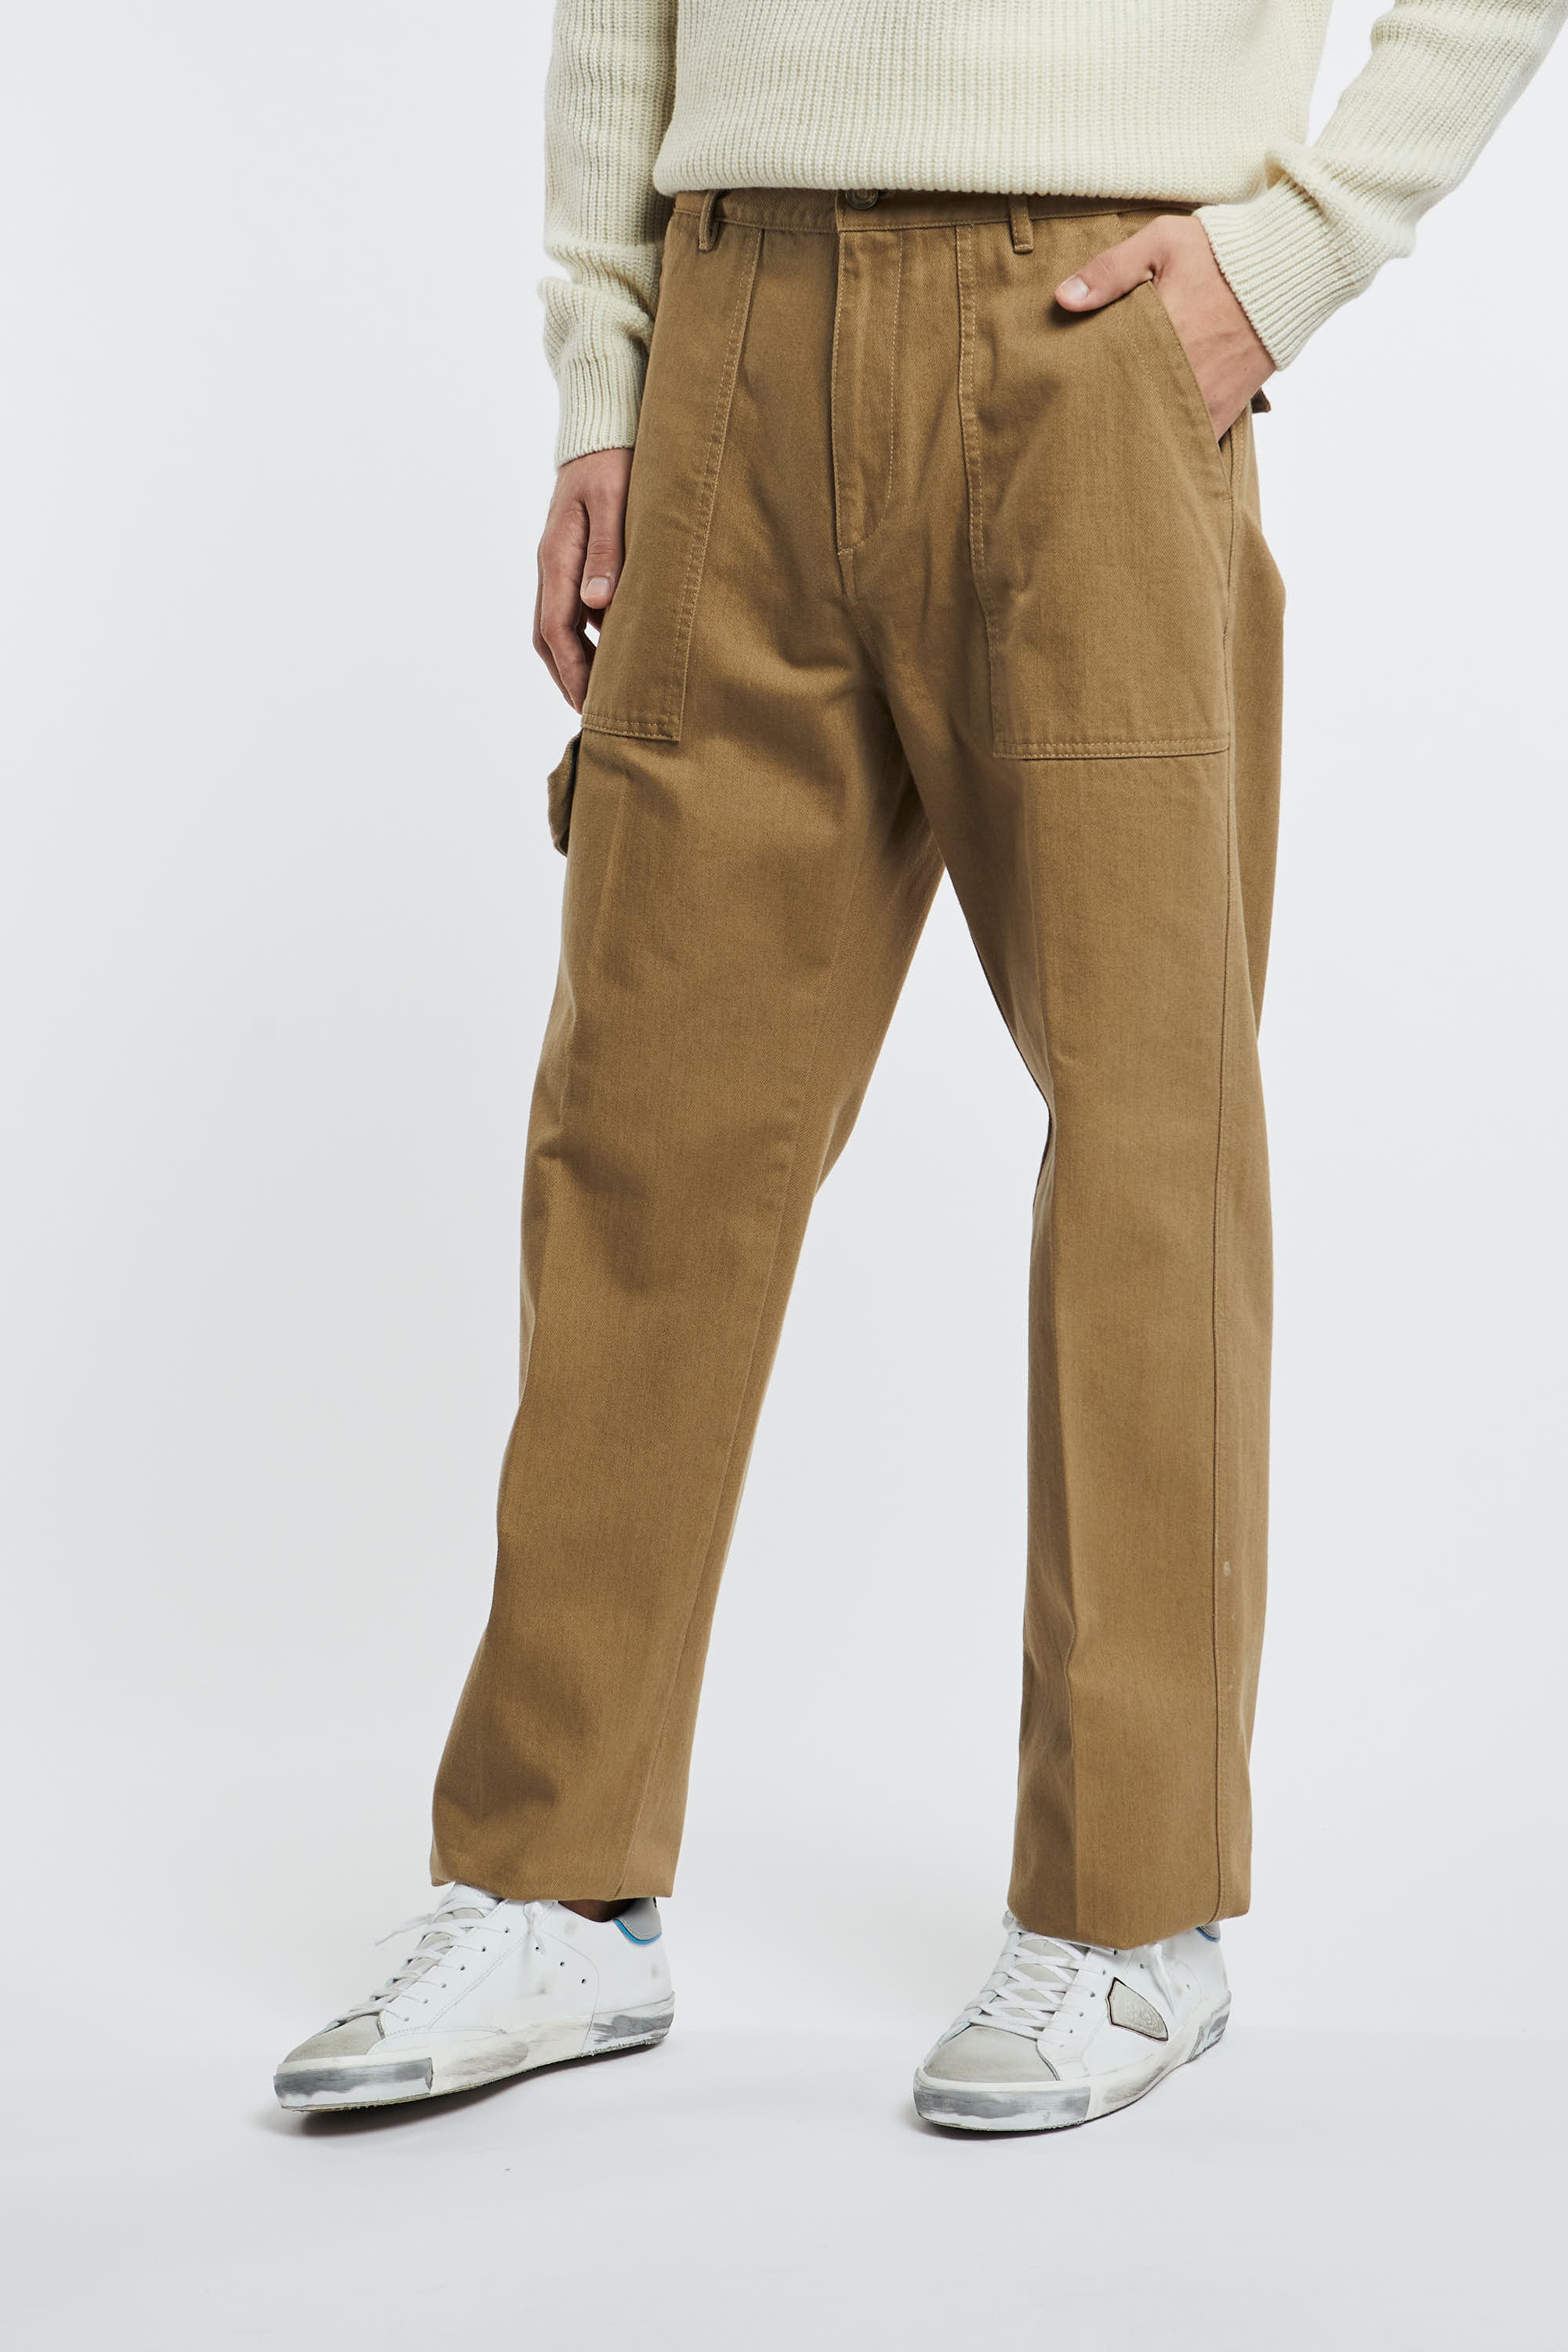 Philippe Model Charles Cotton Pants Beige-3